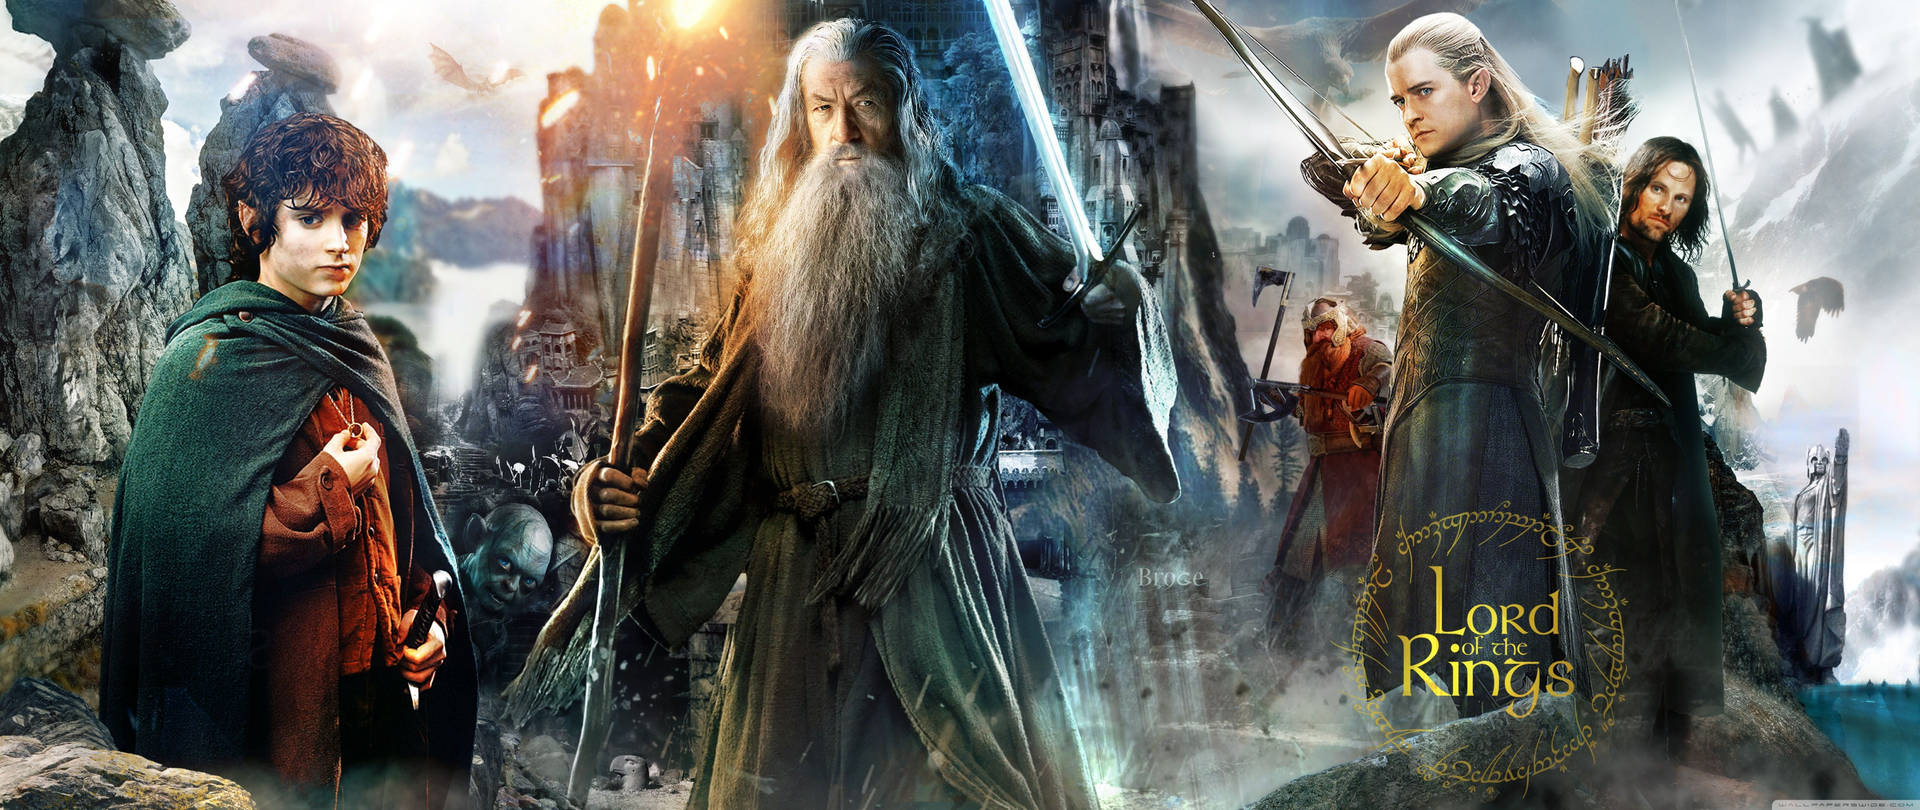 Download HDLord Of The Rings Wallpaper Wallpaper